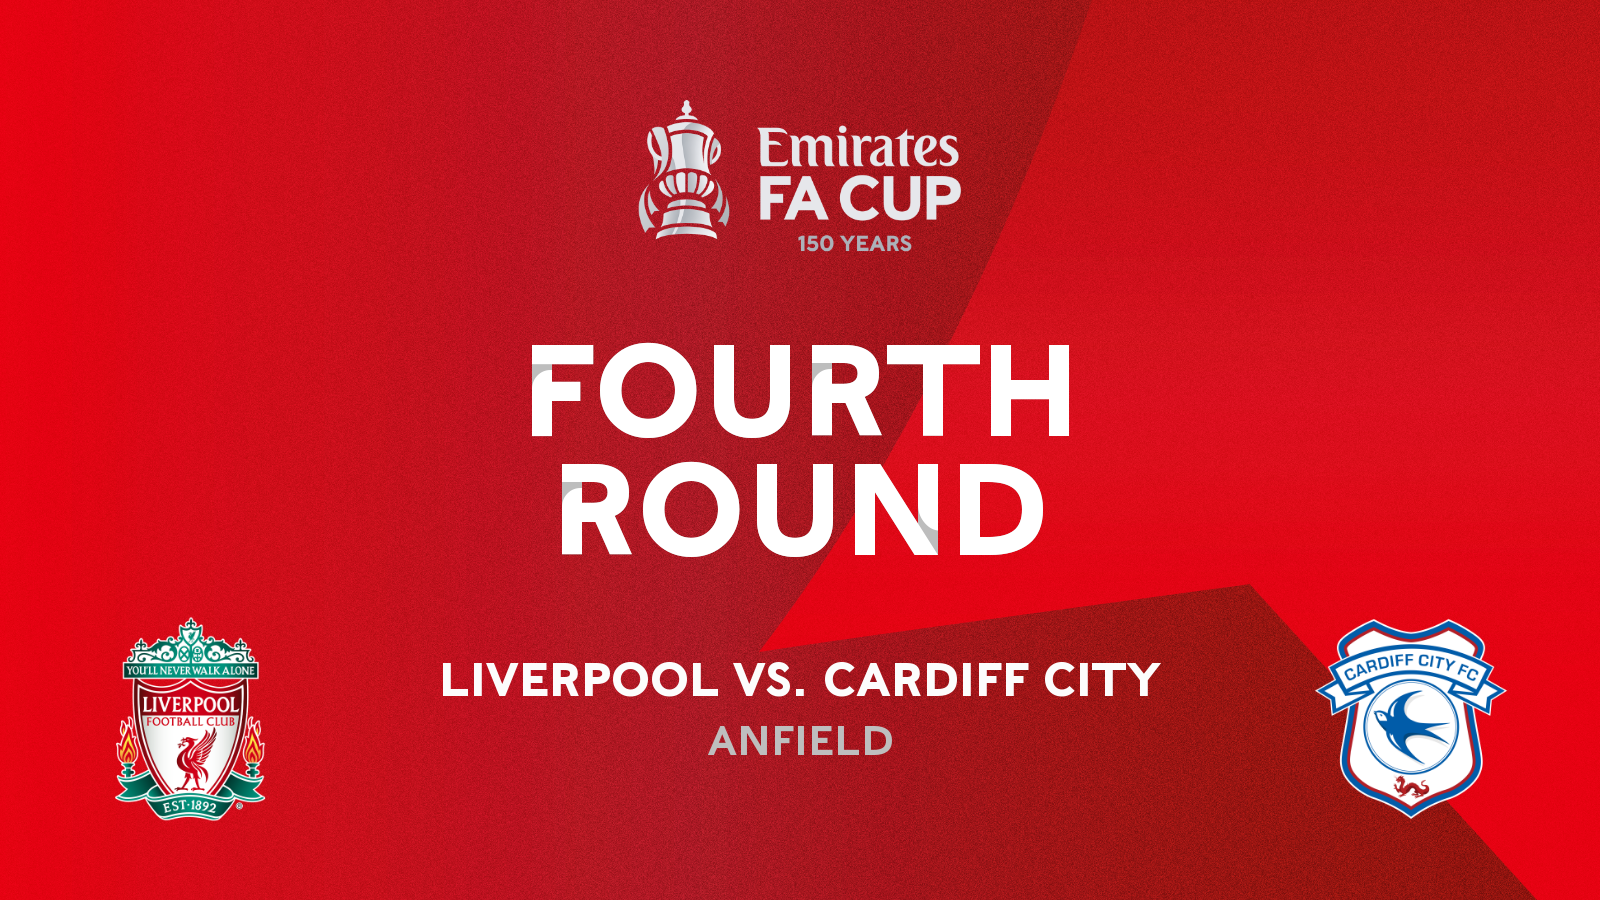 The Bluebirds will travel to Anfield in the Emirates FA Cup Fourth Round...